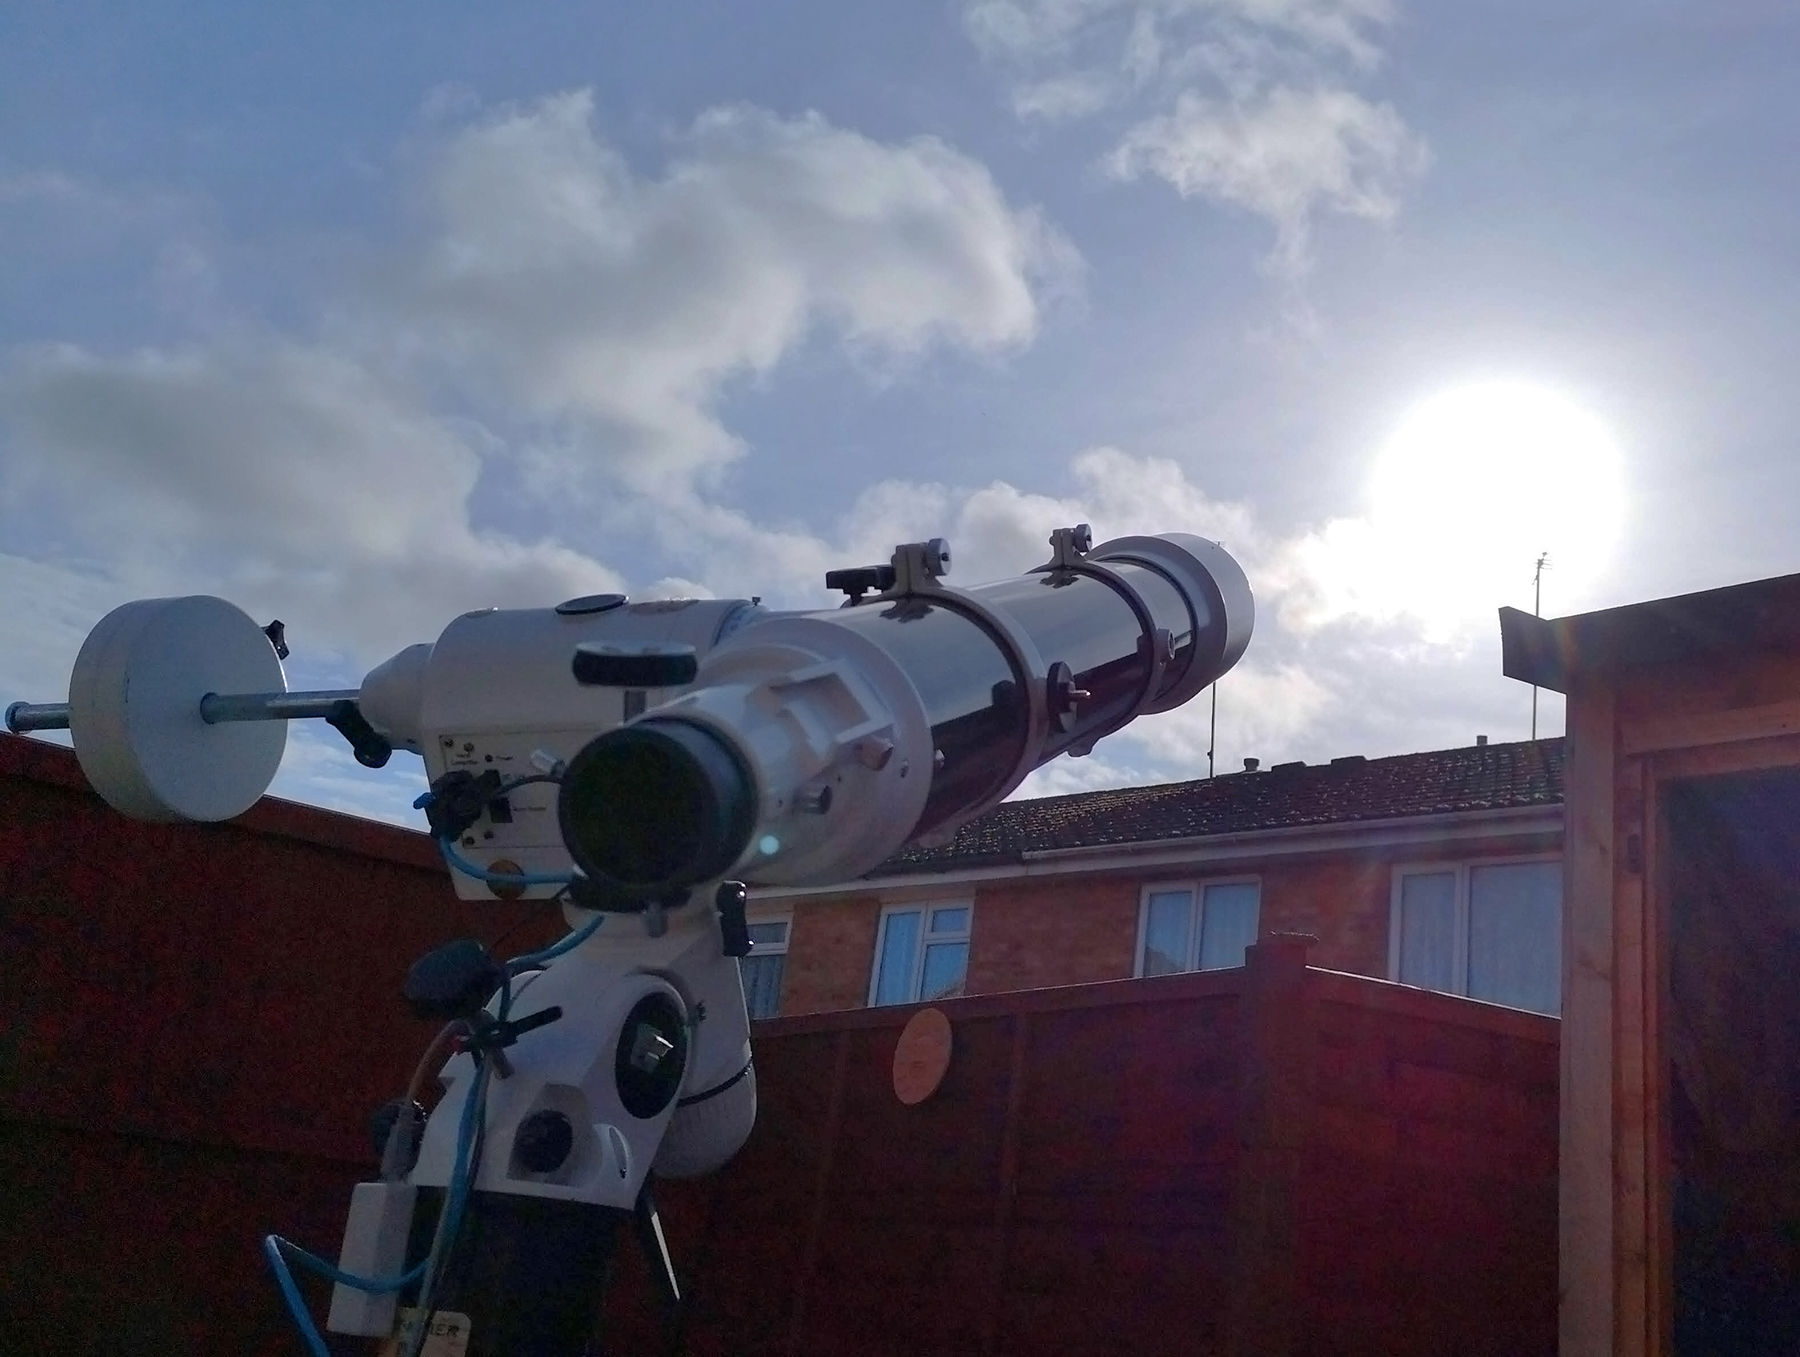 How to polar align an equatorial mount safely using the Sun. Credit: Dave Eagle